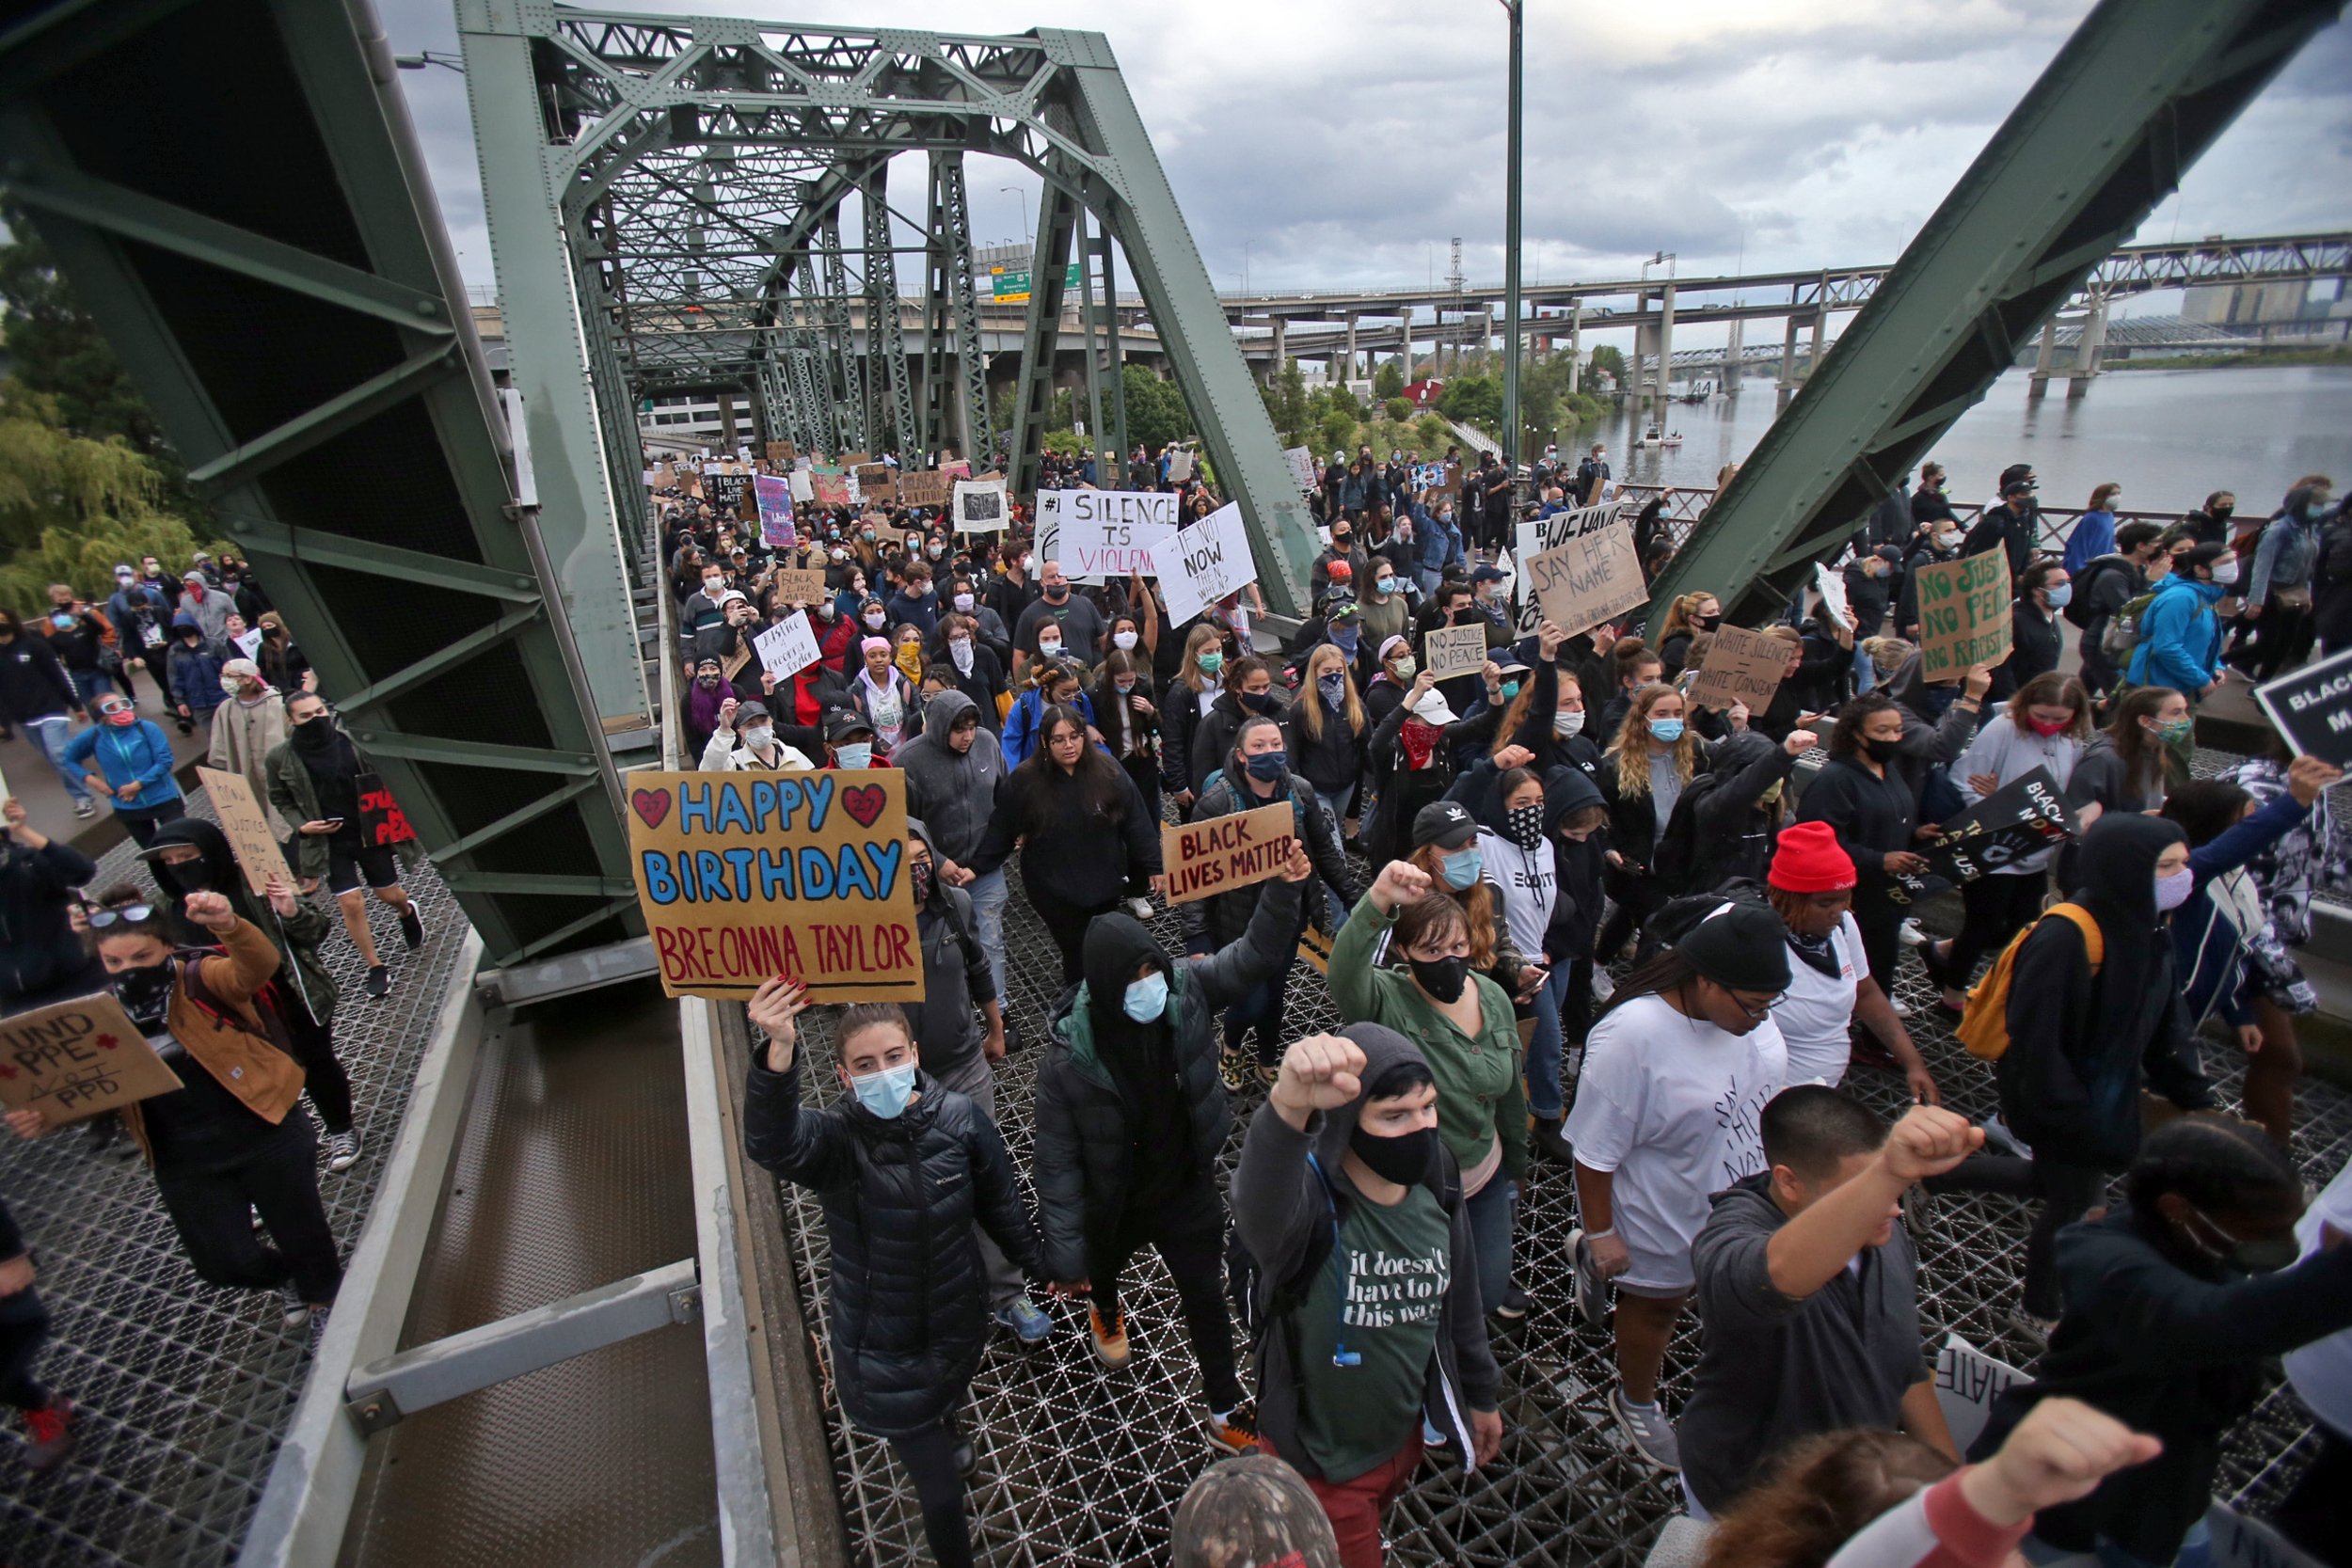 Thousands of protesters marched from Revolution Hall in Southeast Portland to Tom McCall Waterfront Park in downtown to demonstrate against the death of George Floyd, a black man killed by police in Minneapolis. Sean Meagher/Staff